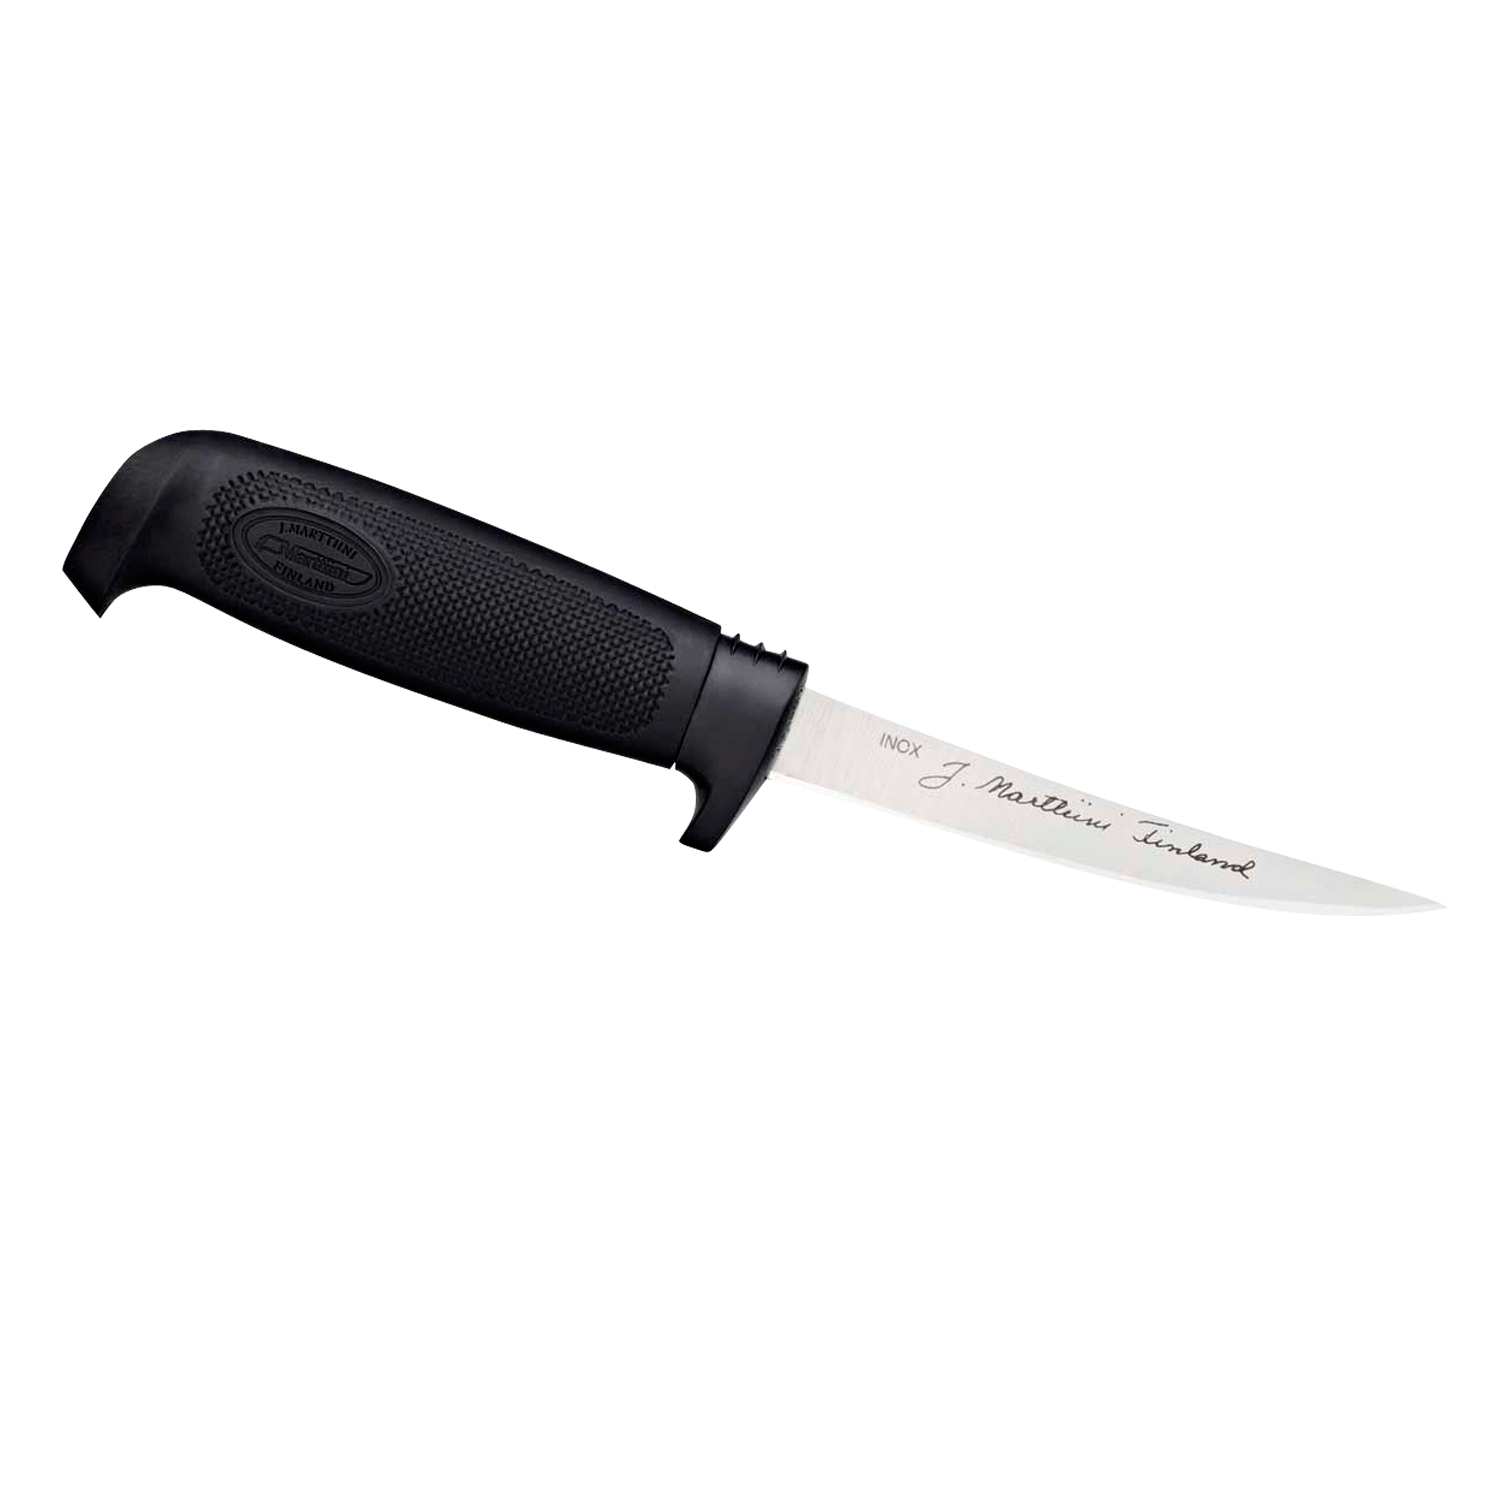 Marttiini Finnish Filleting Knife at low prices